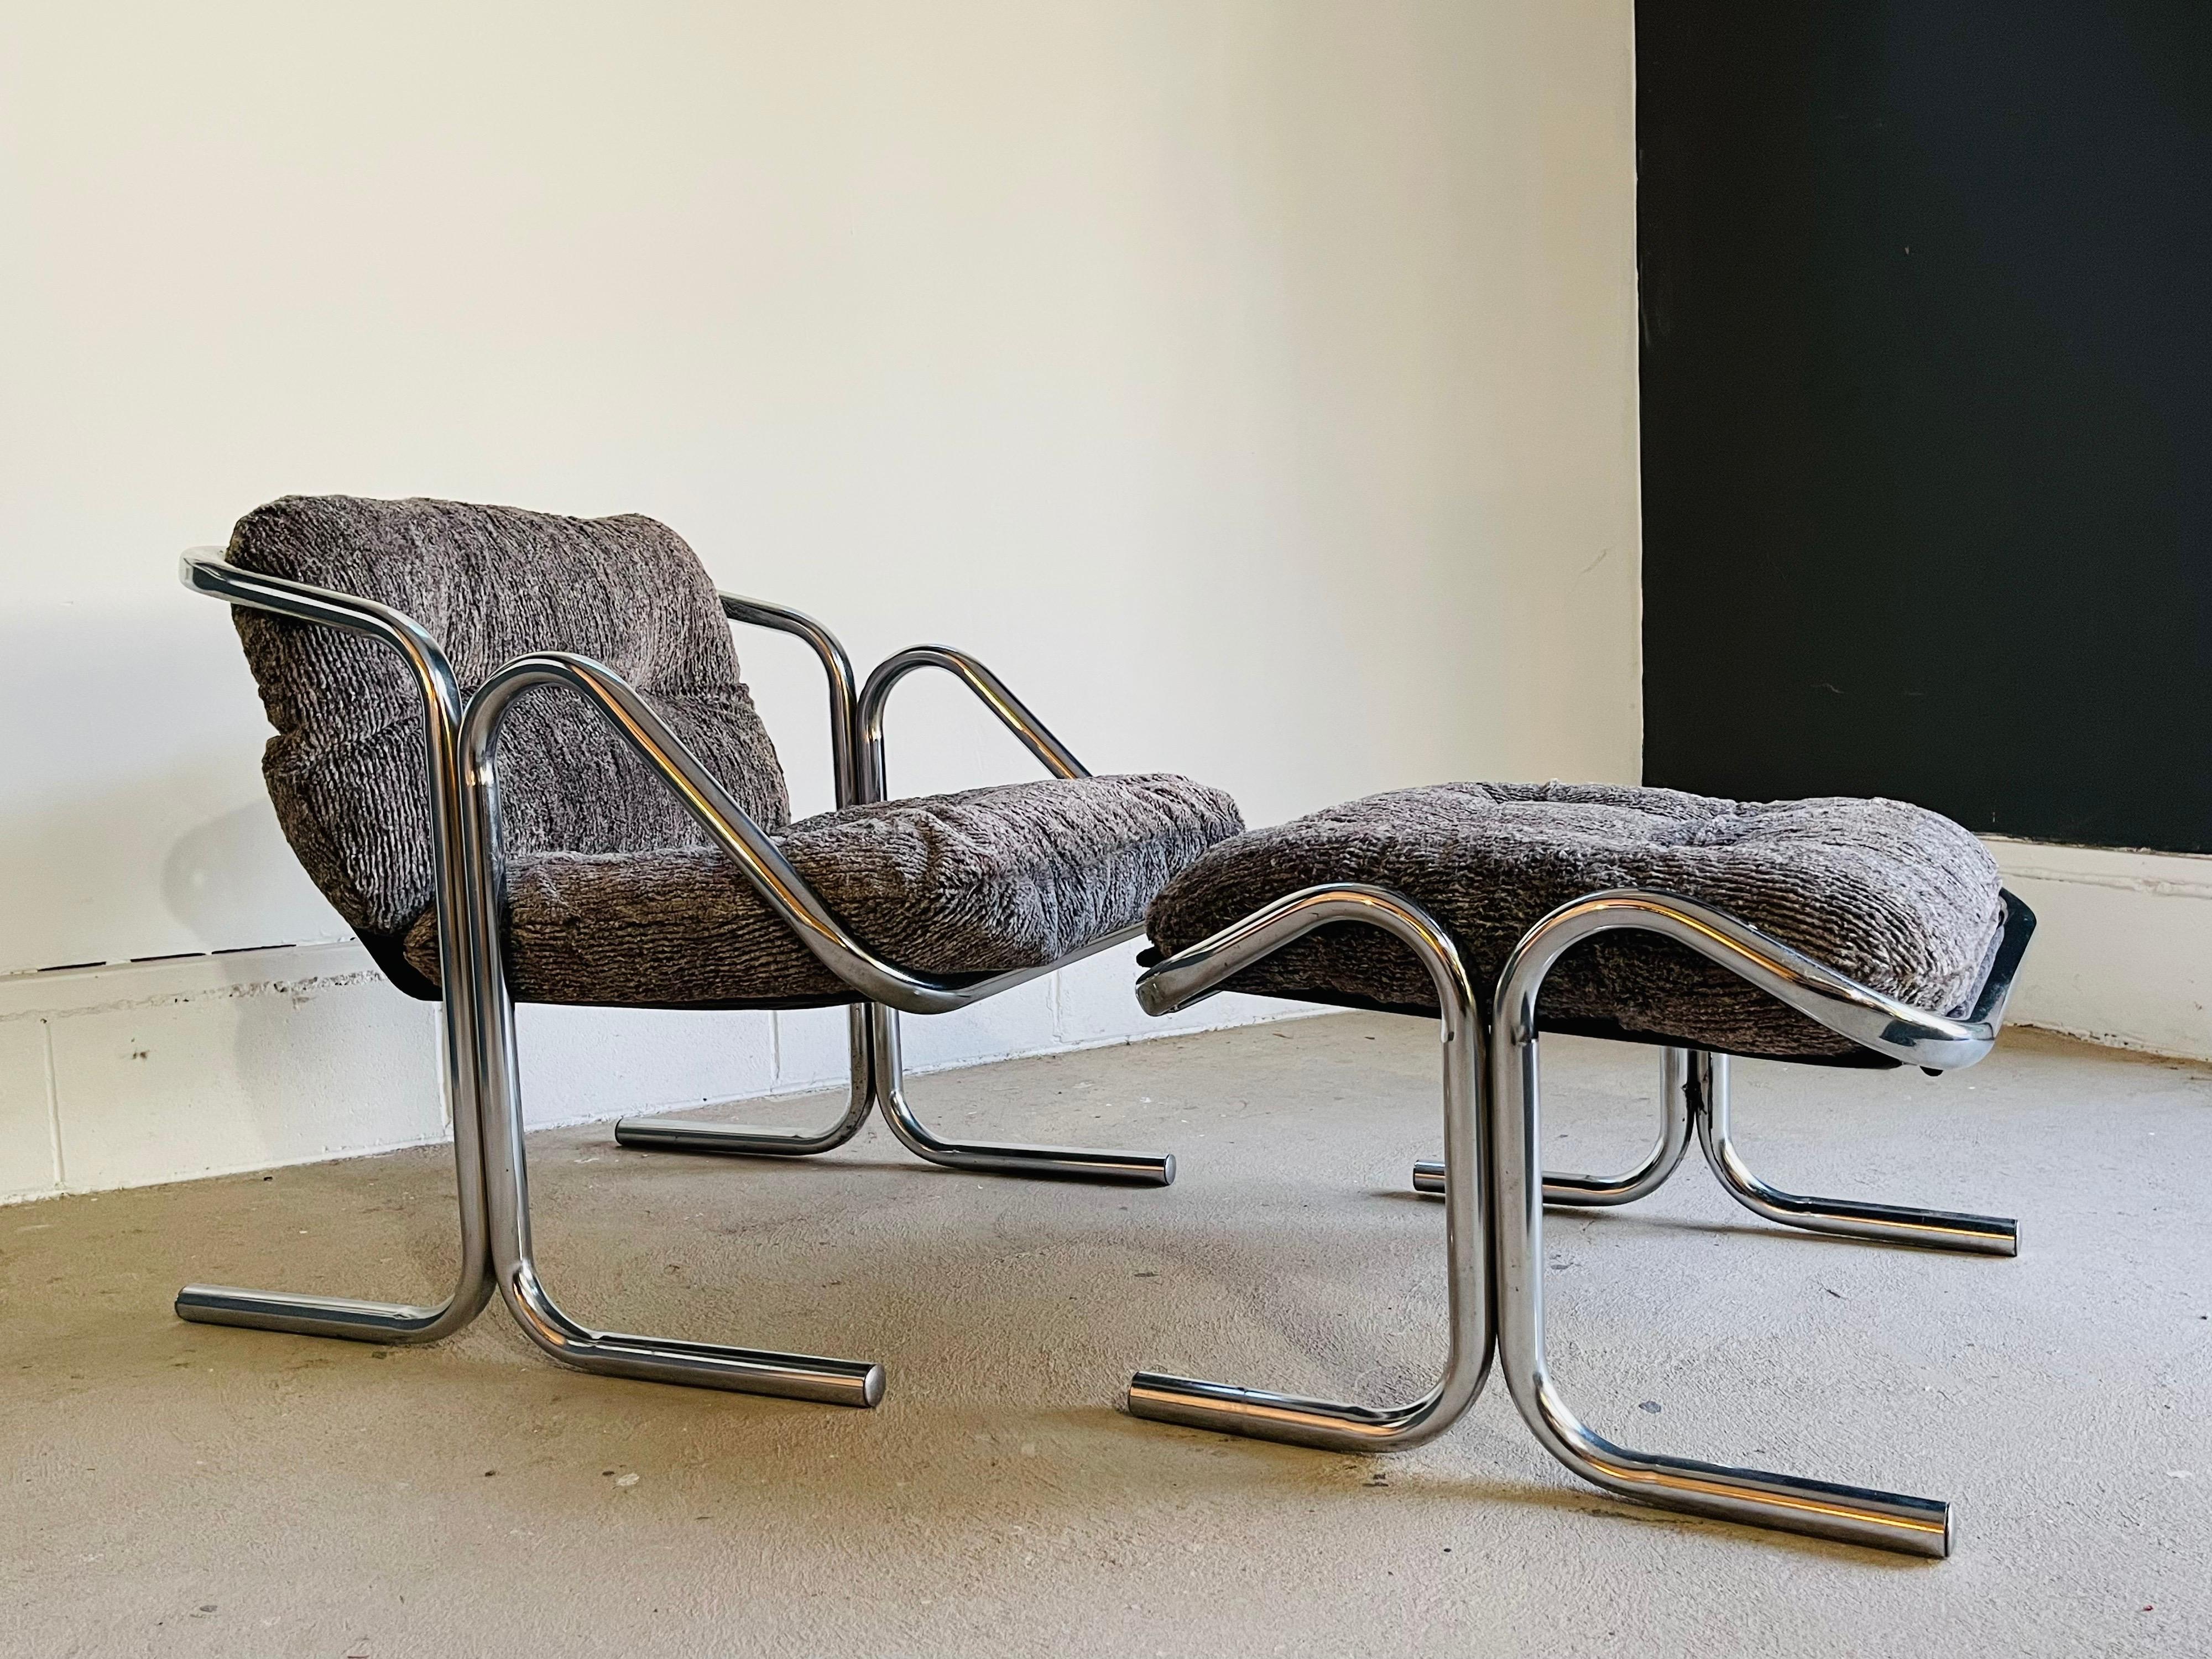 Mid-Century Modern chrome lounge chair & ottoman by Jerry Johnson for Landes. The chair has a very fluffy and soft gray fabric on a chrome frame. Both chair and ottoman are in good vintage condition with normal wear consistent with age and use. We